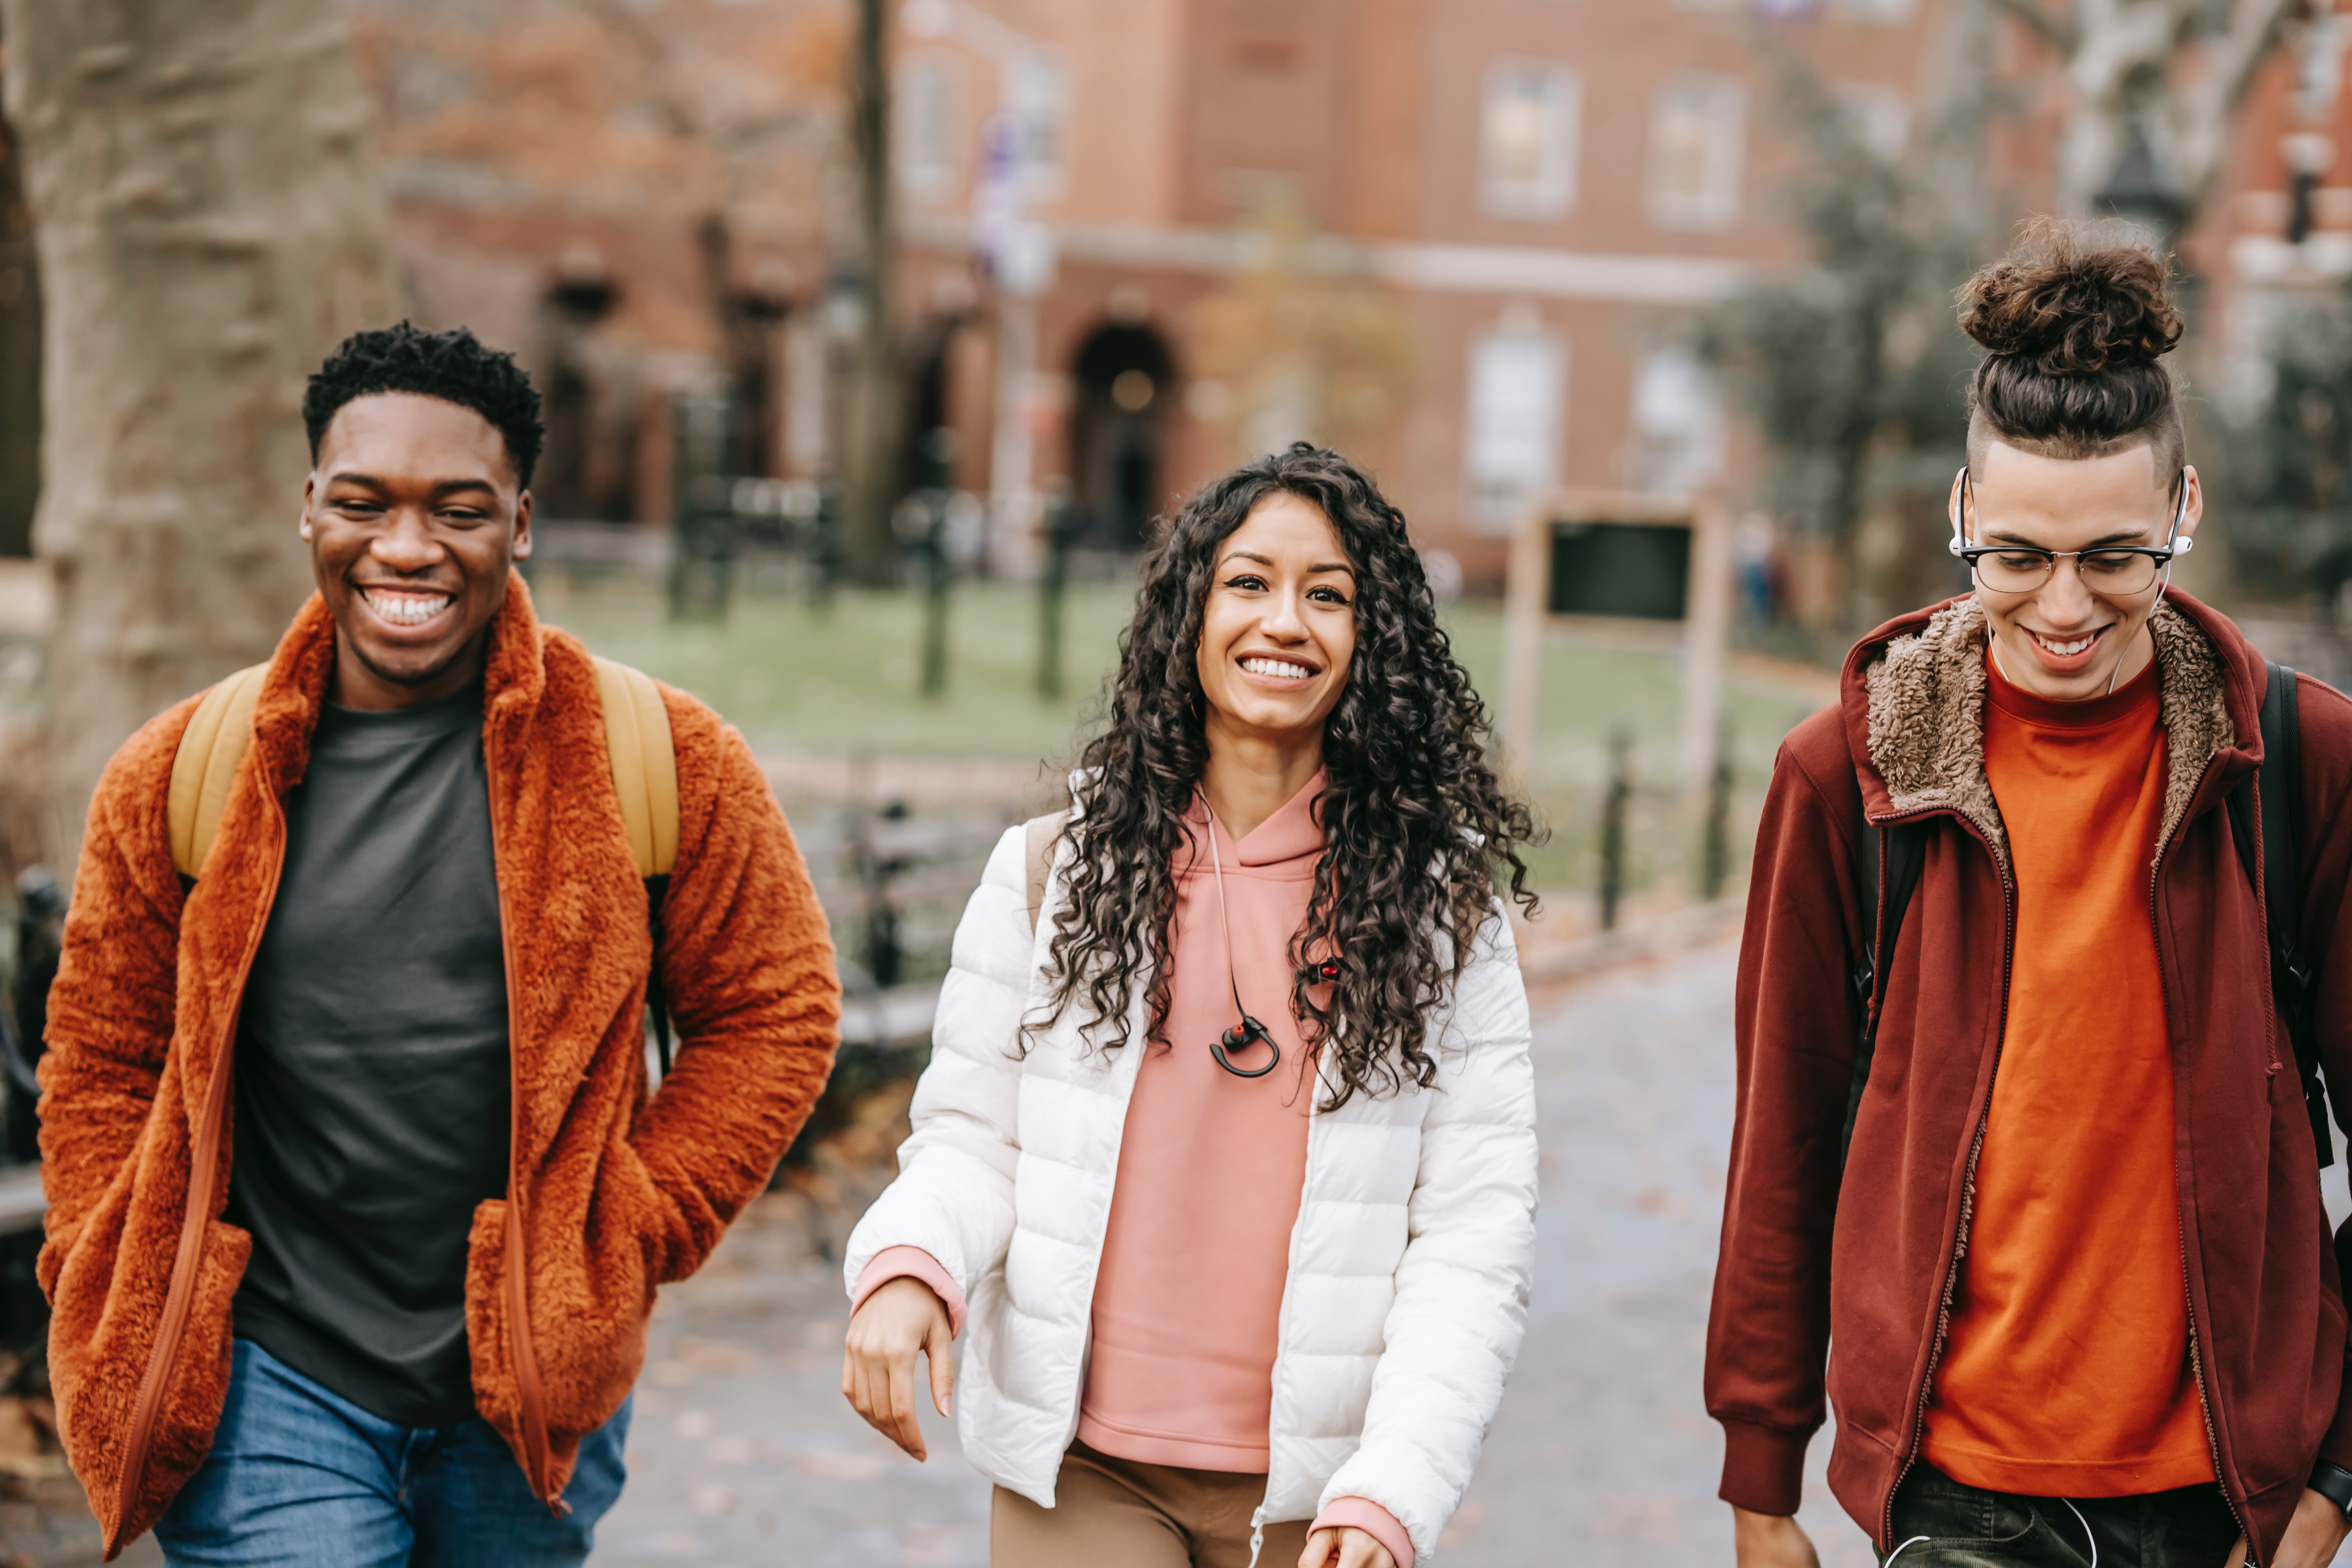 A group of attractive friends smiling and walking together at a school campus wearing fall clothing.